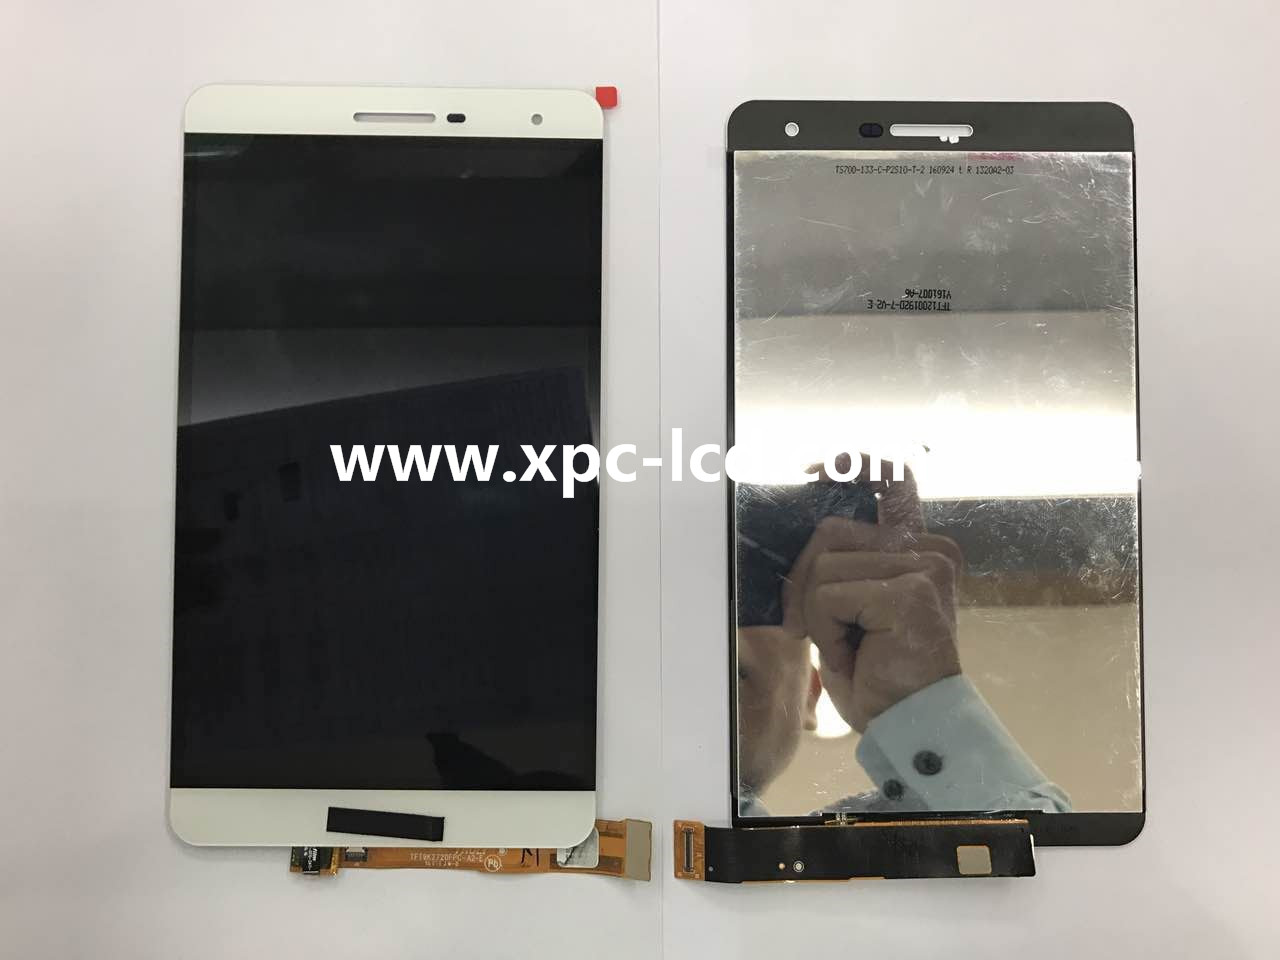 For Huawei M2 lite LCD touch screen Black